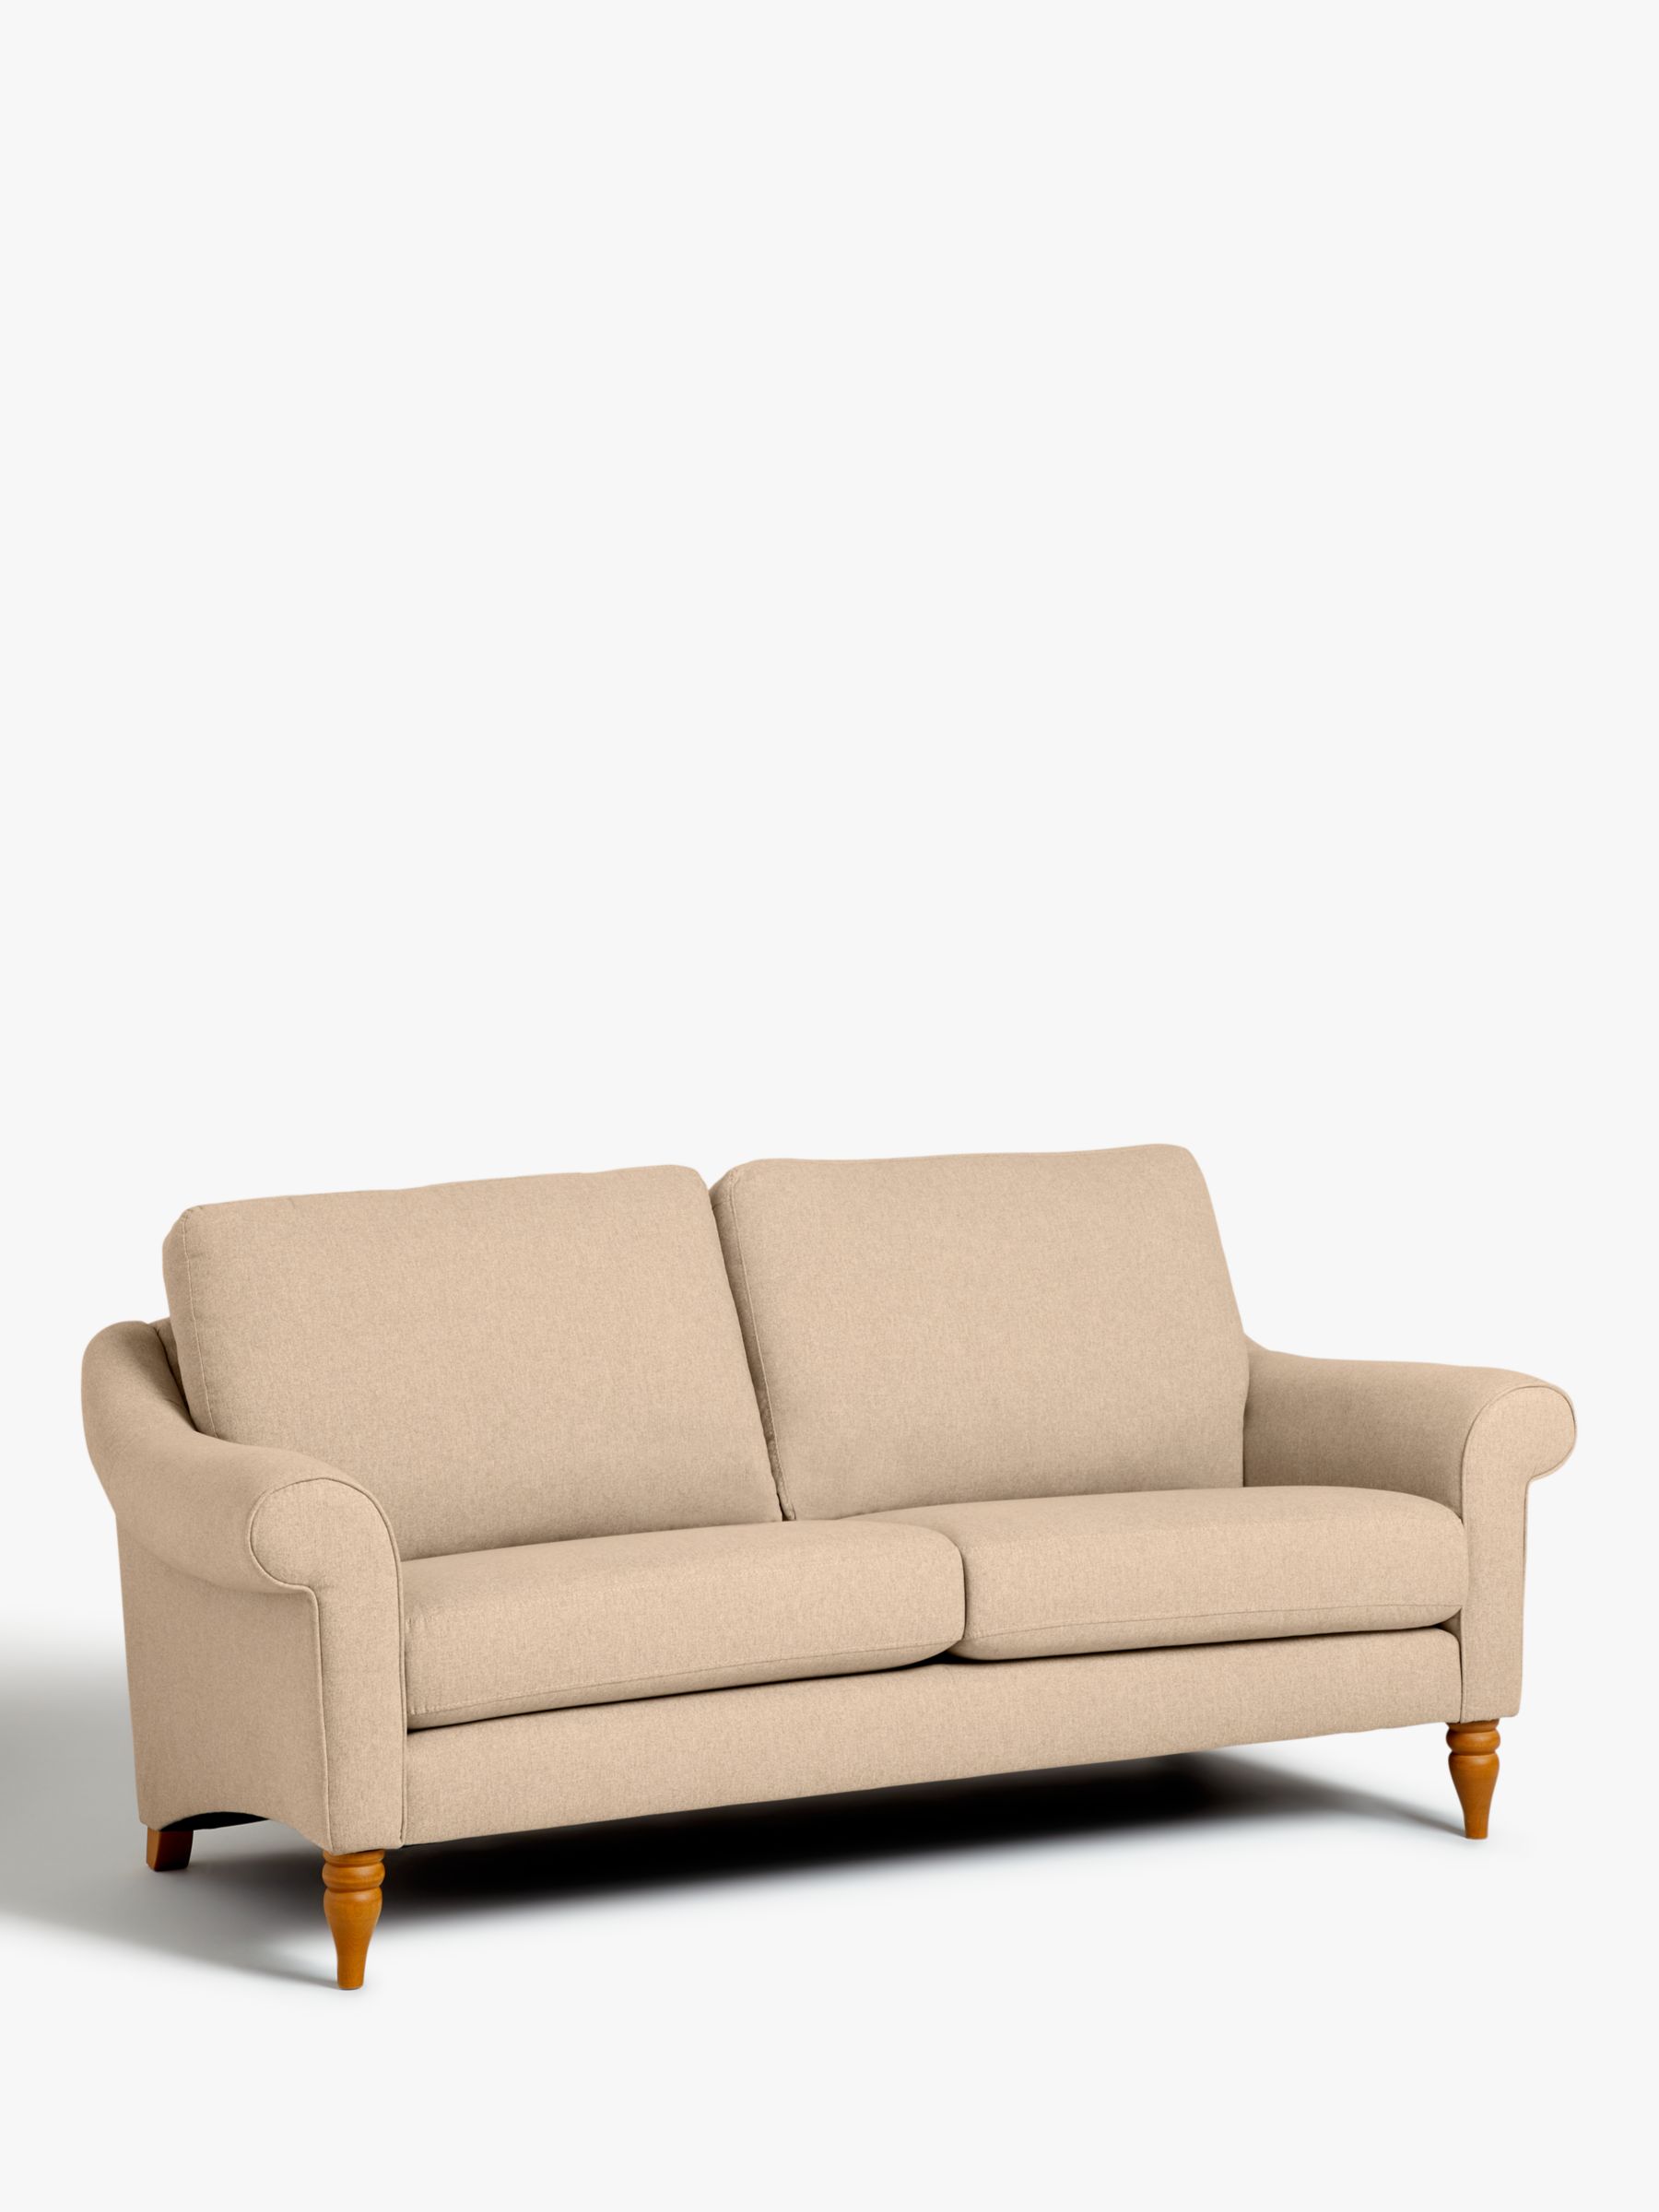 Camber Range, John Lewis Camber Large 3 Seater Sofa, Light Leg, Easy Clean Recycled Brushed Cotton Natural